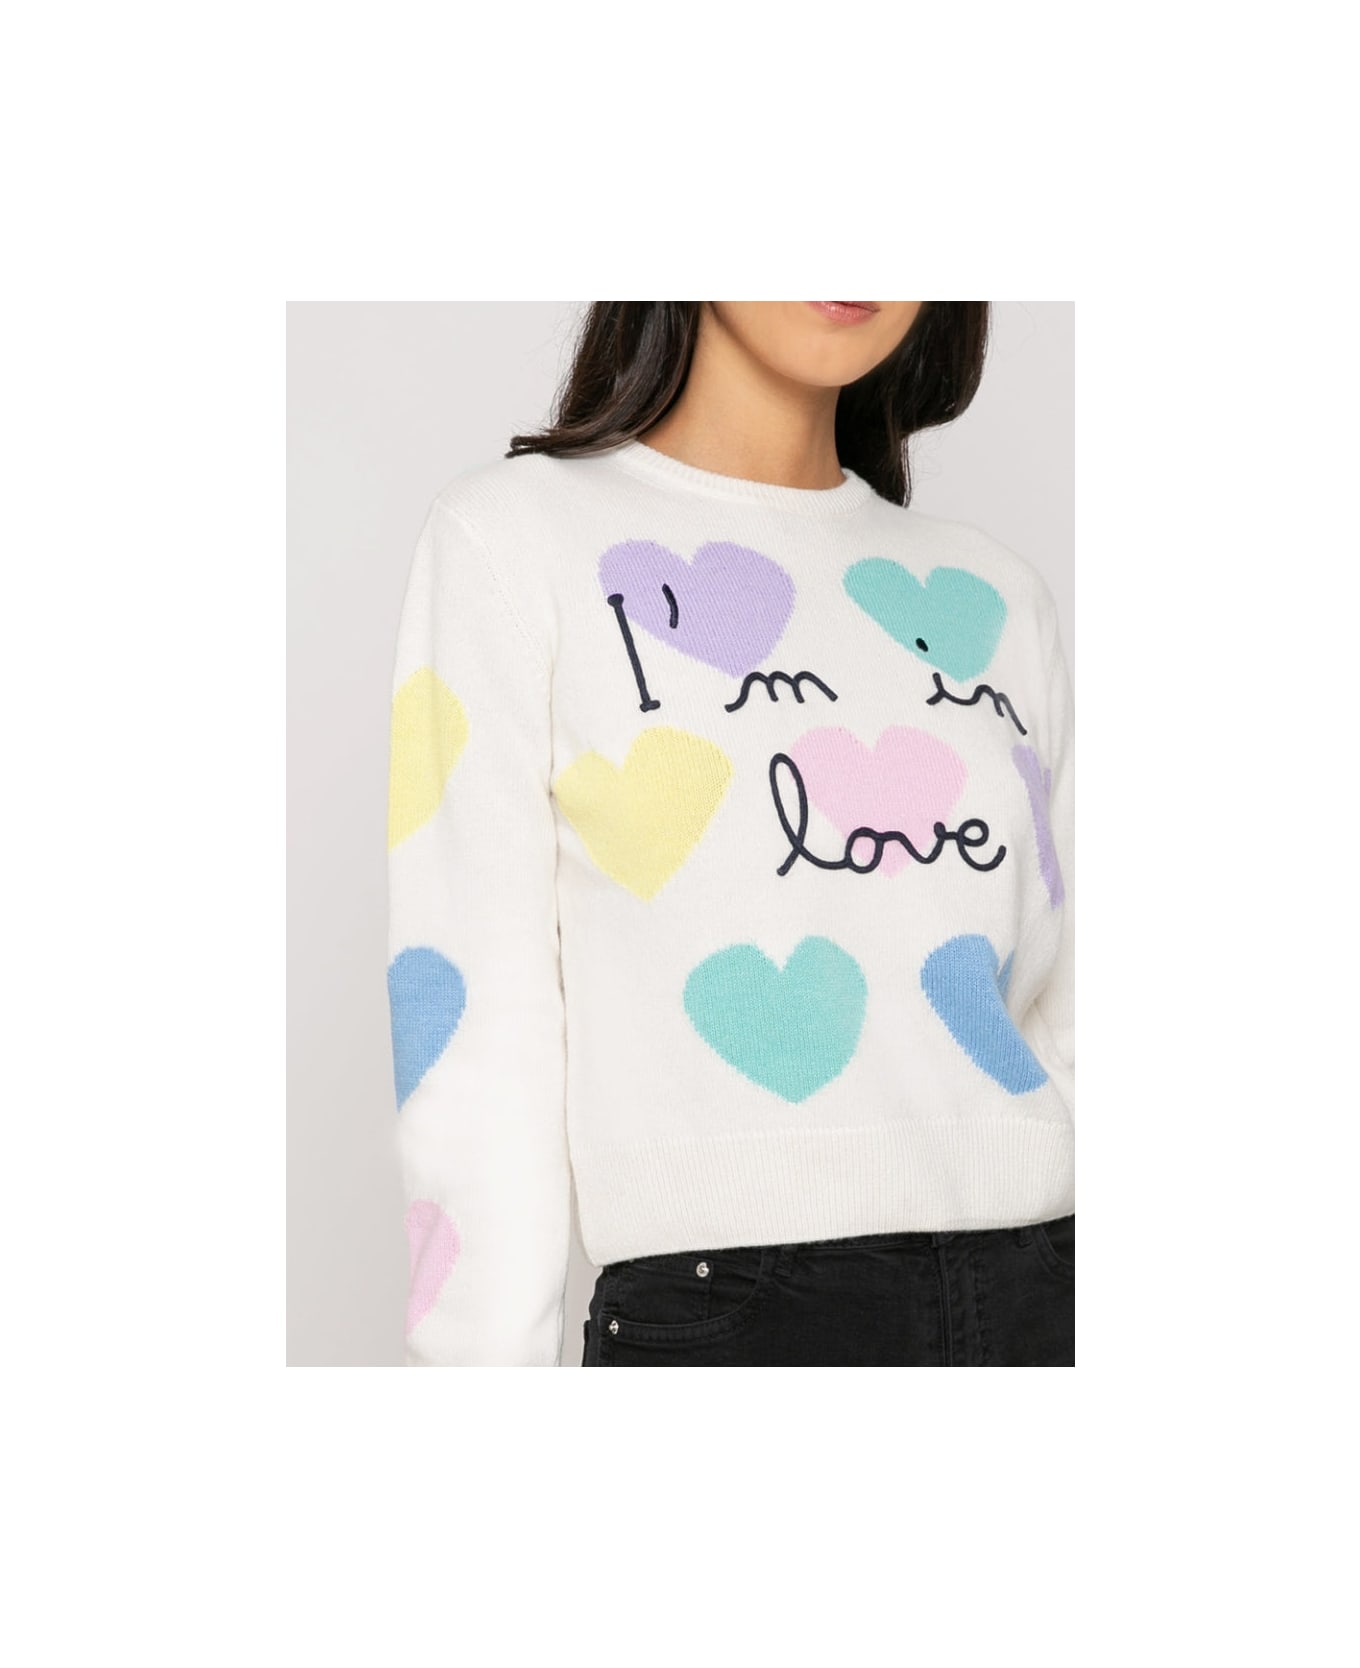 MC2 Saint Barth Woman Sweater With Hearts Print And I'm In Love Embroidery - WHITE